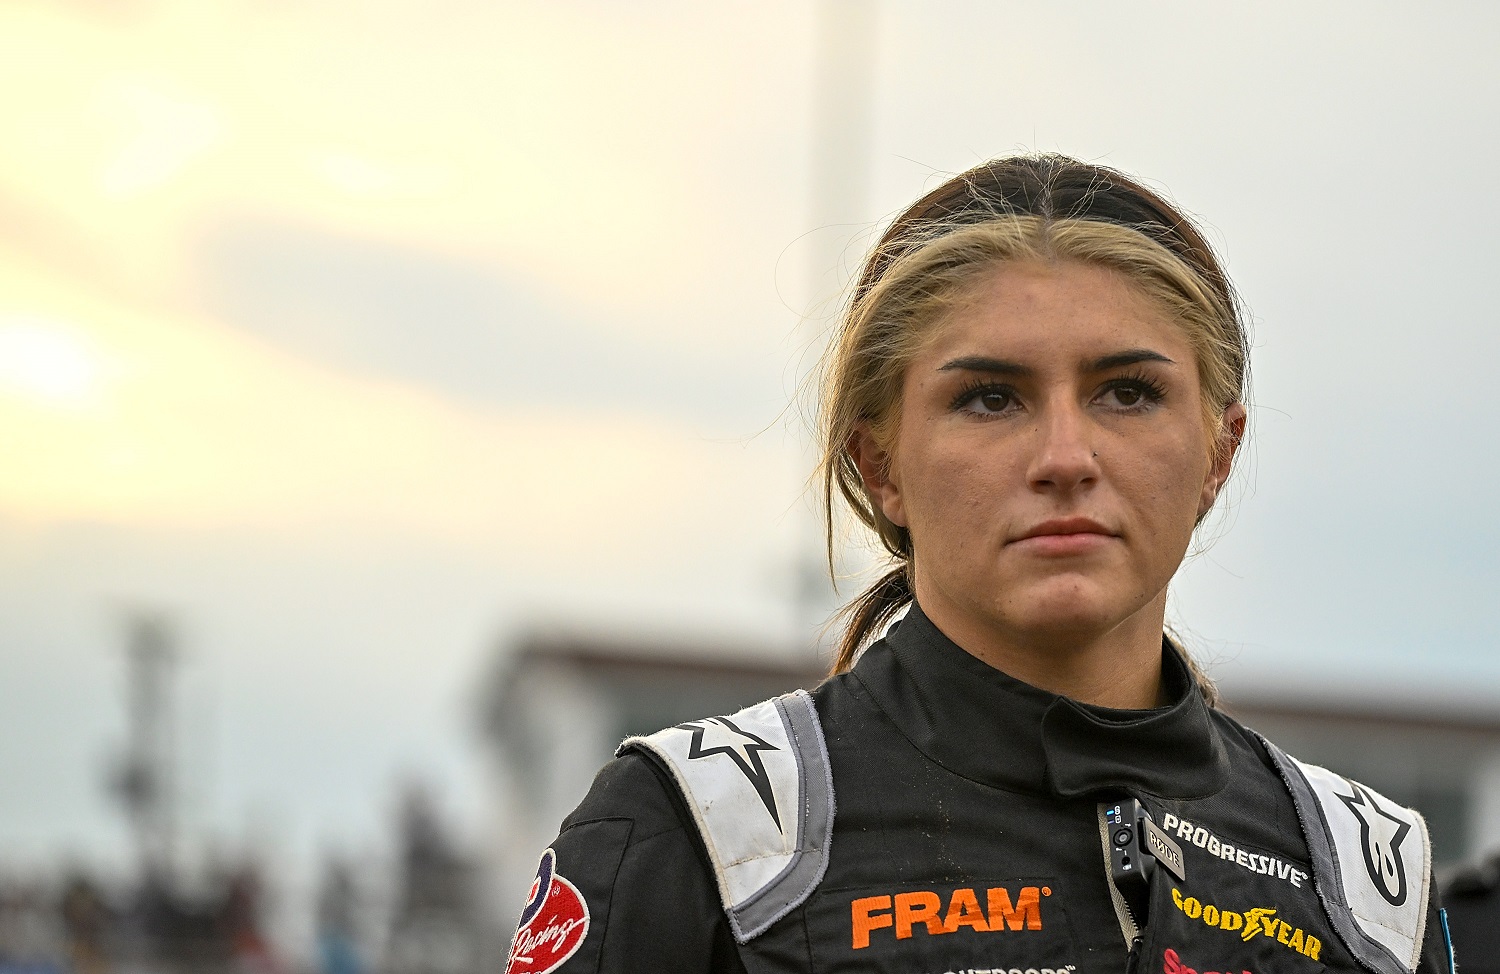 The Little Guys and Hailie Deegan Have the Most to Lose Following Camping World’s Disclosure